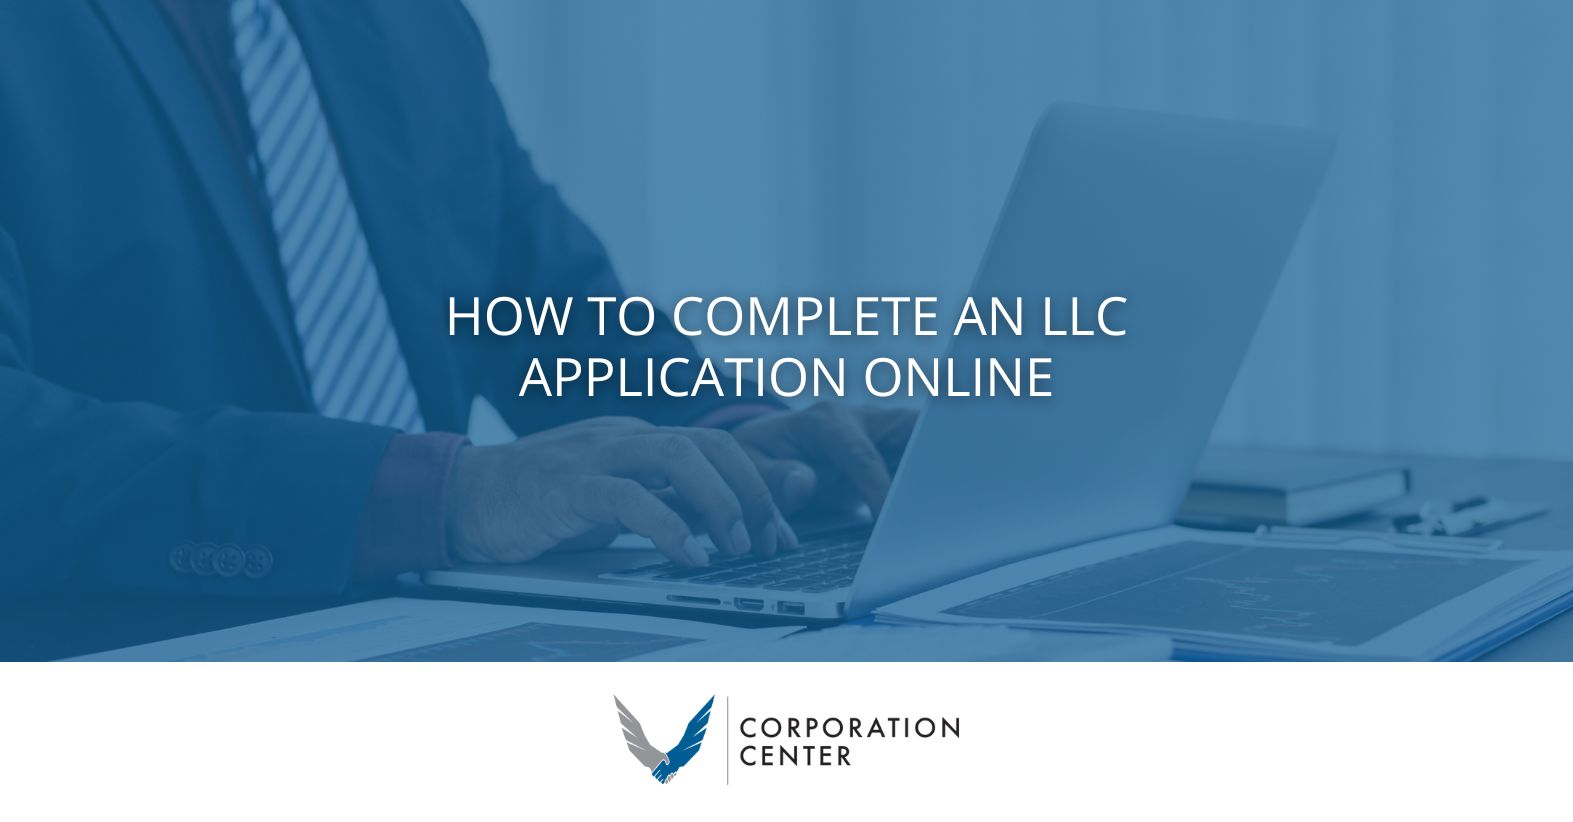 How to Complete an LLC Application Online